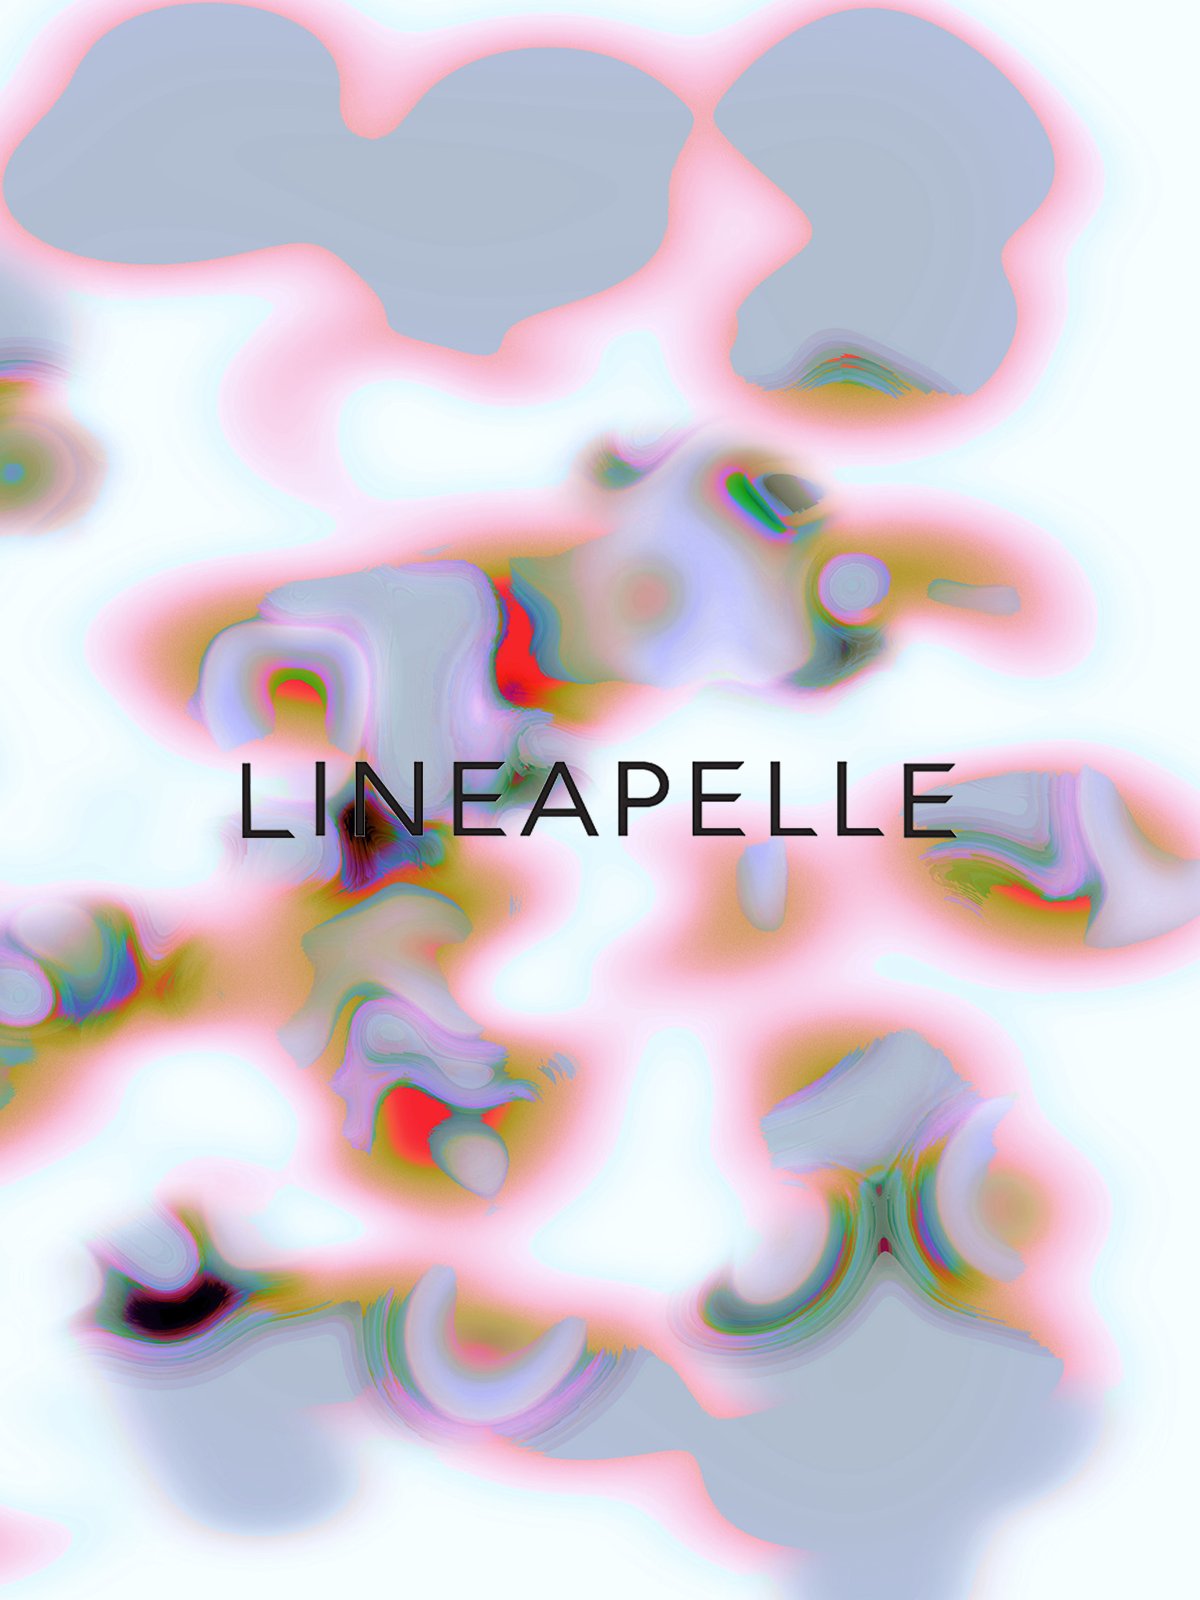 February 21st – 23rd 2023, LINEAPELLE reaffirms its centrality for the international fashion, design, and automotive industries